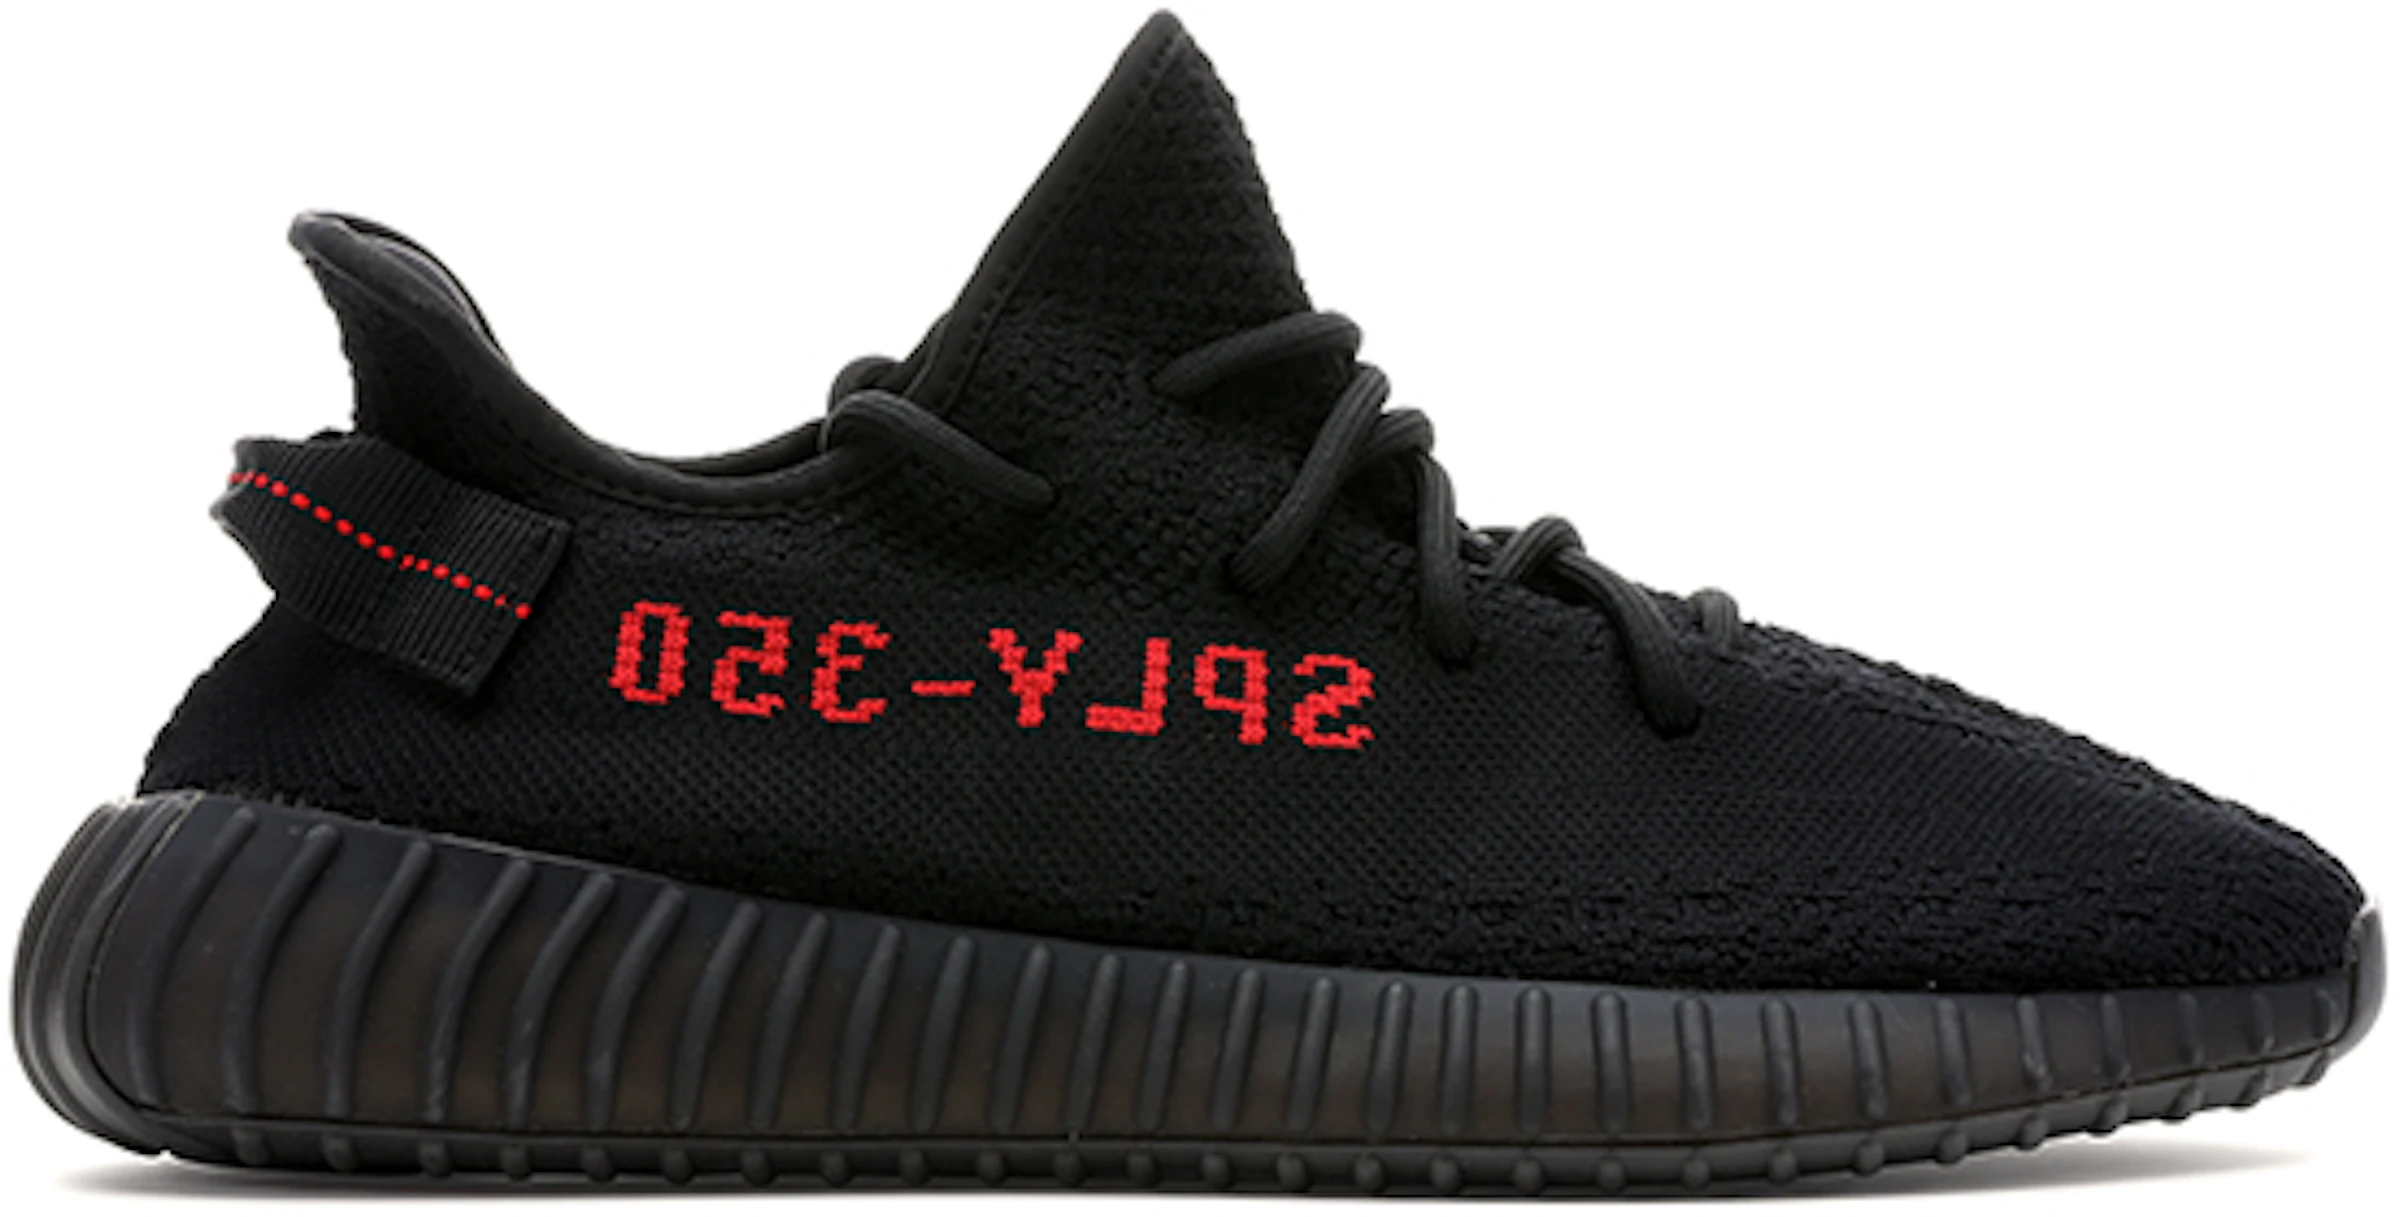 adidas Yeezy Boost V2 Black Red (2017/2020) - CP9652 - US